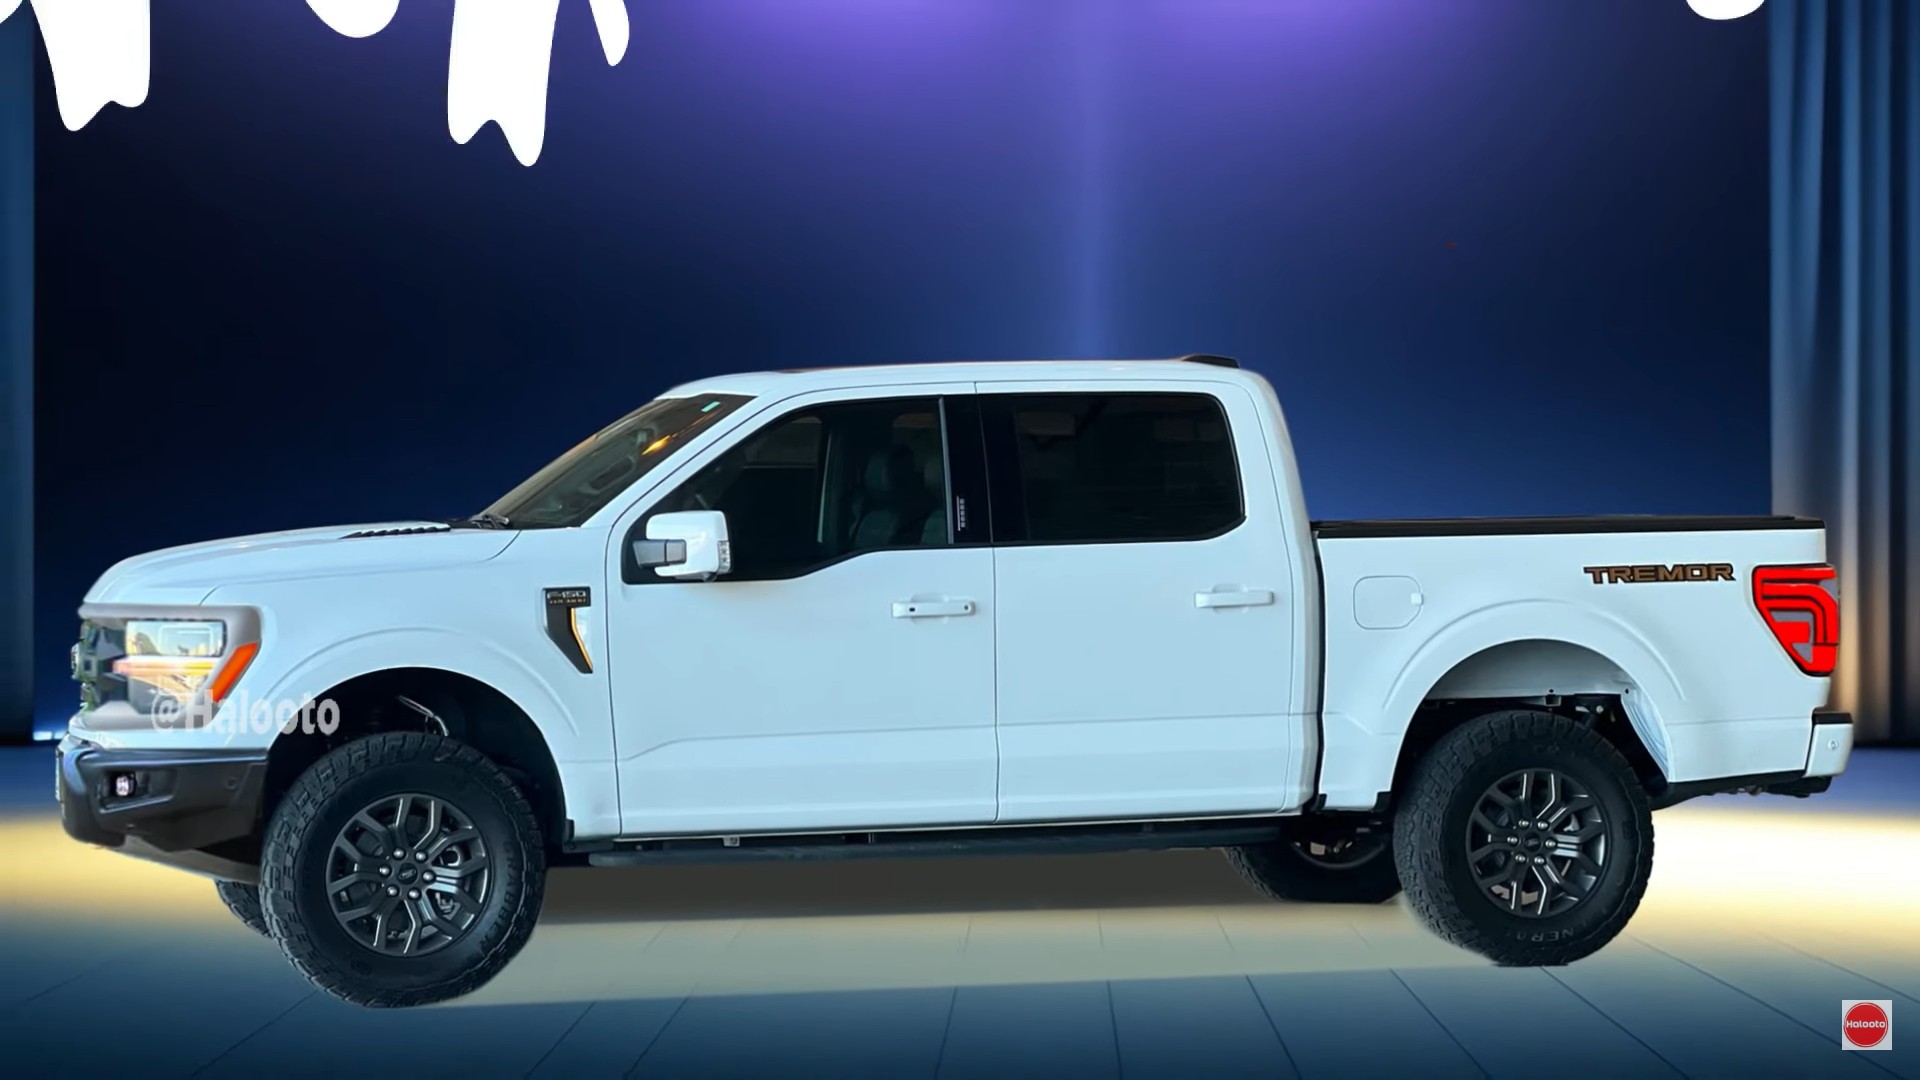 2024 Ford F-150 Truck Refresh Gets Imagined With All Possible Interior  Changes - autoevolution